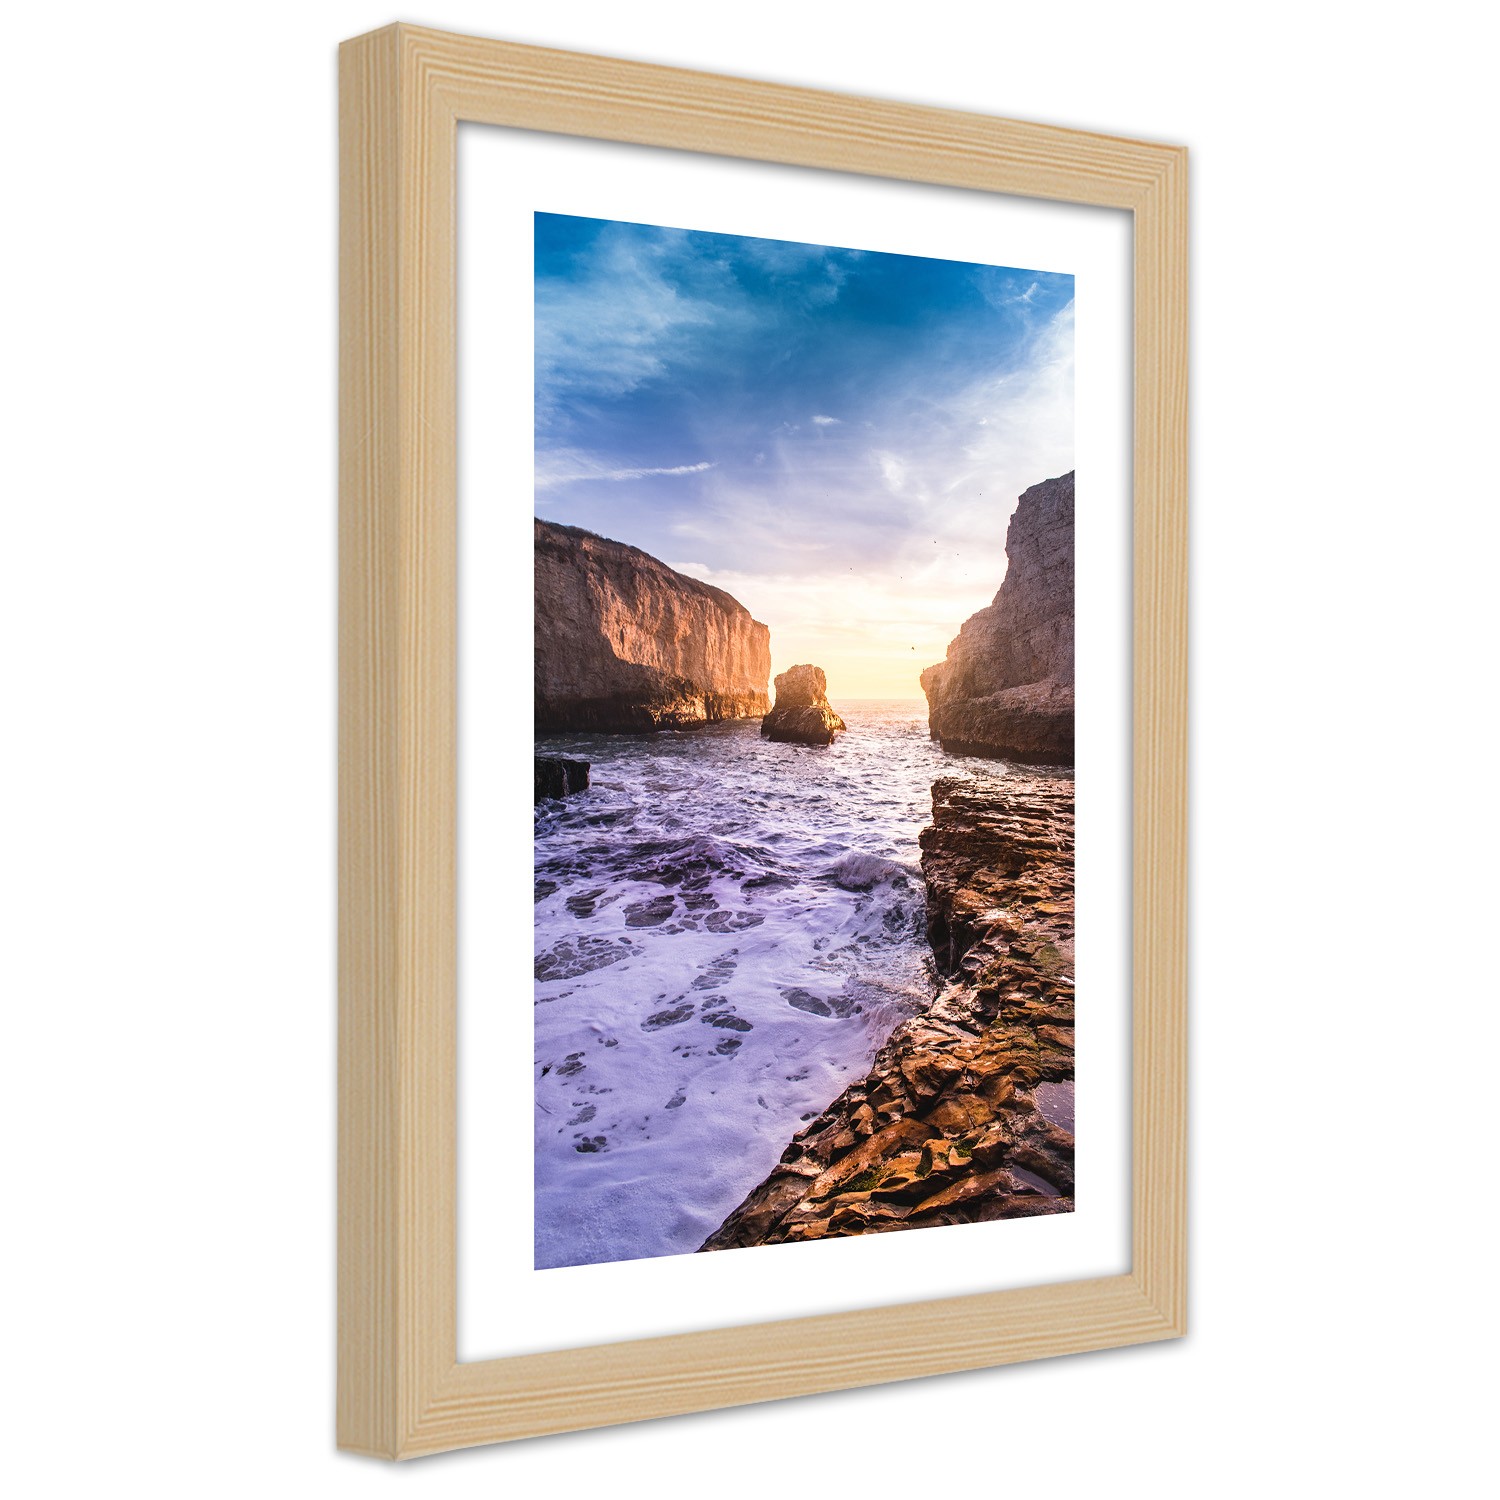 Caro Picture in natural frame, Ocean and rocks